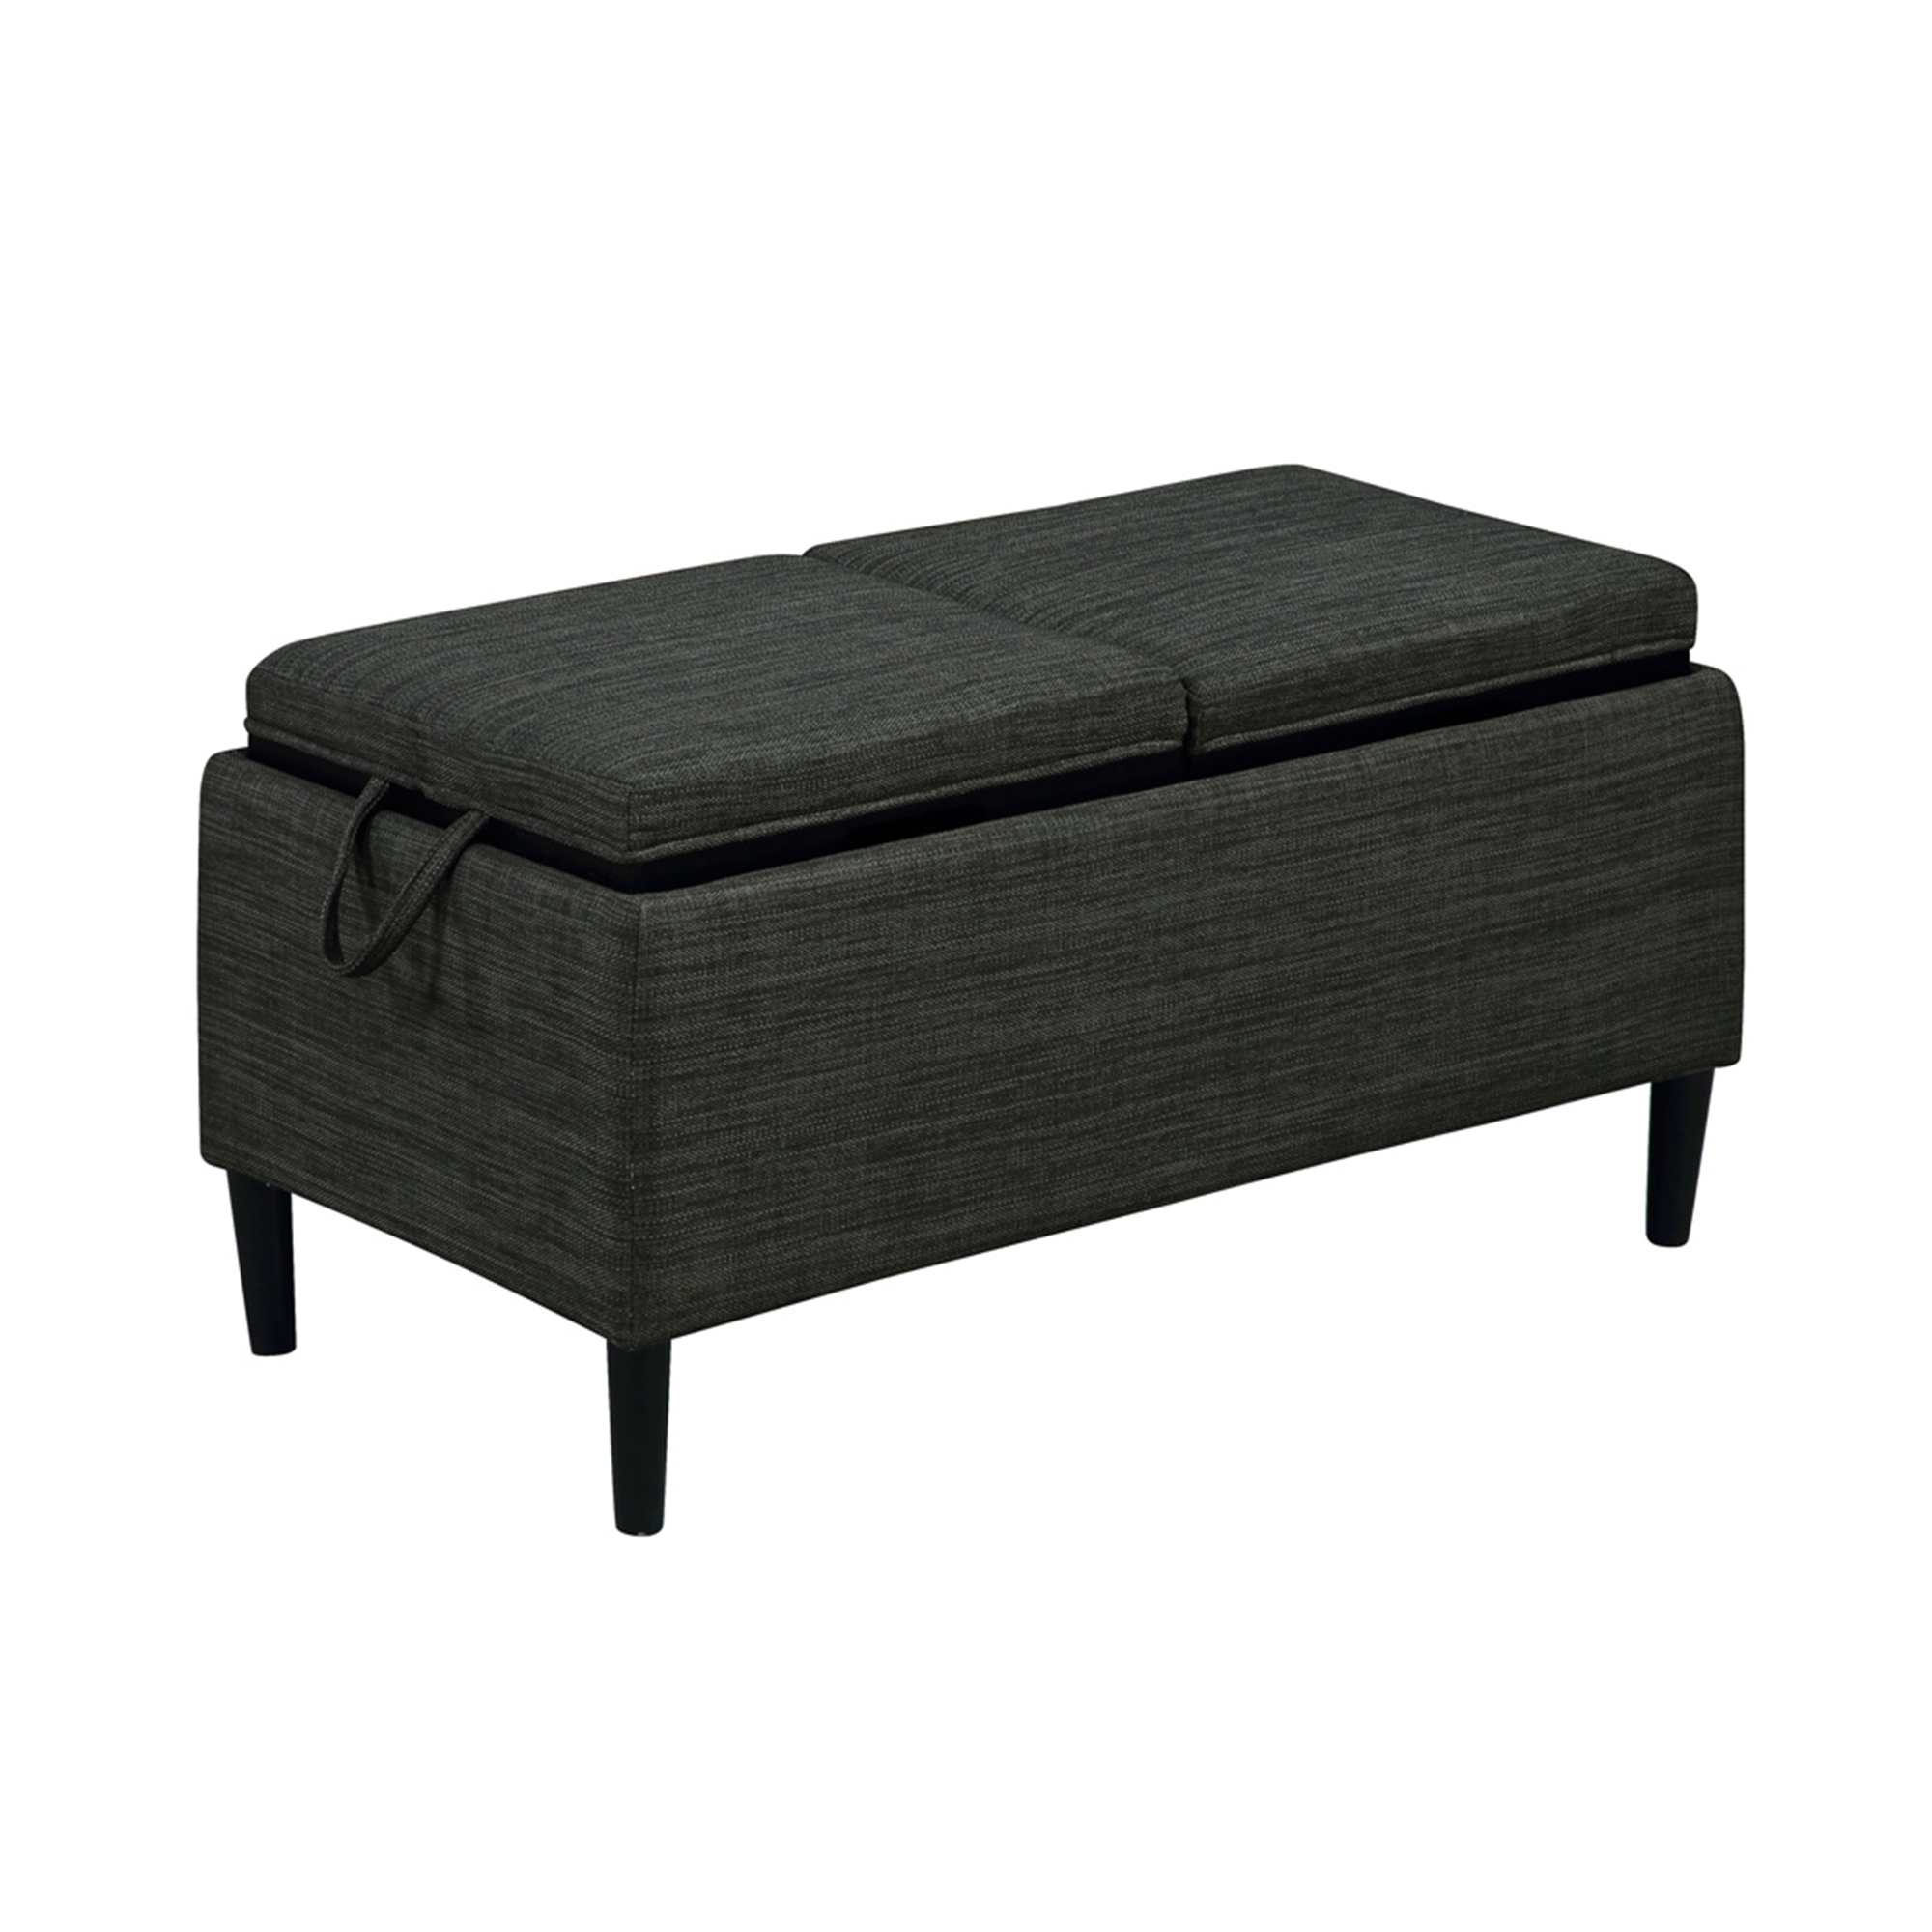 Convenience Concepts Designs4Comfort Magnolia Storage Ottoman with Reversible Trays, Dark Charcoal Gray Fabric - image 3 of 7